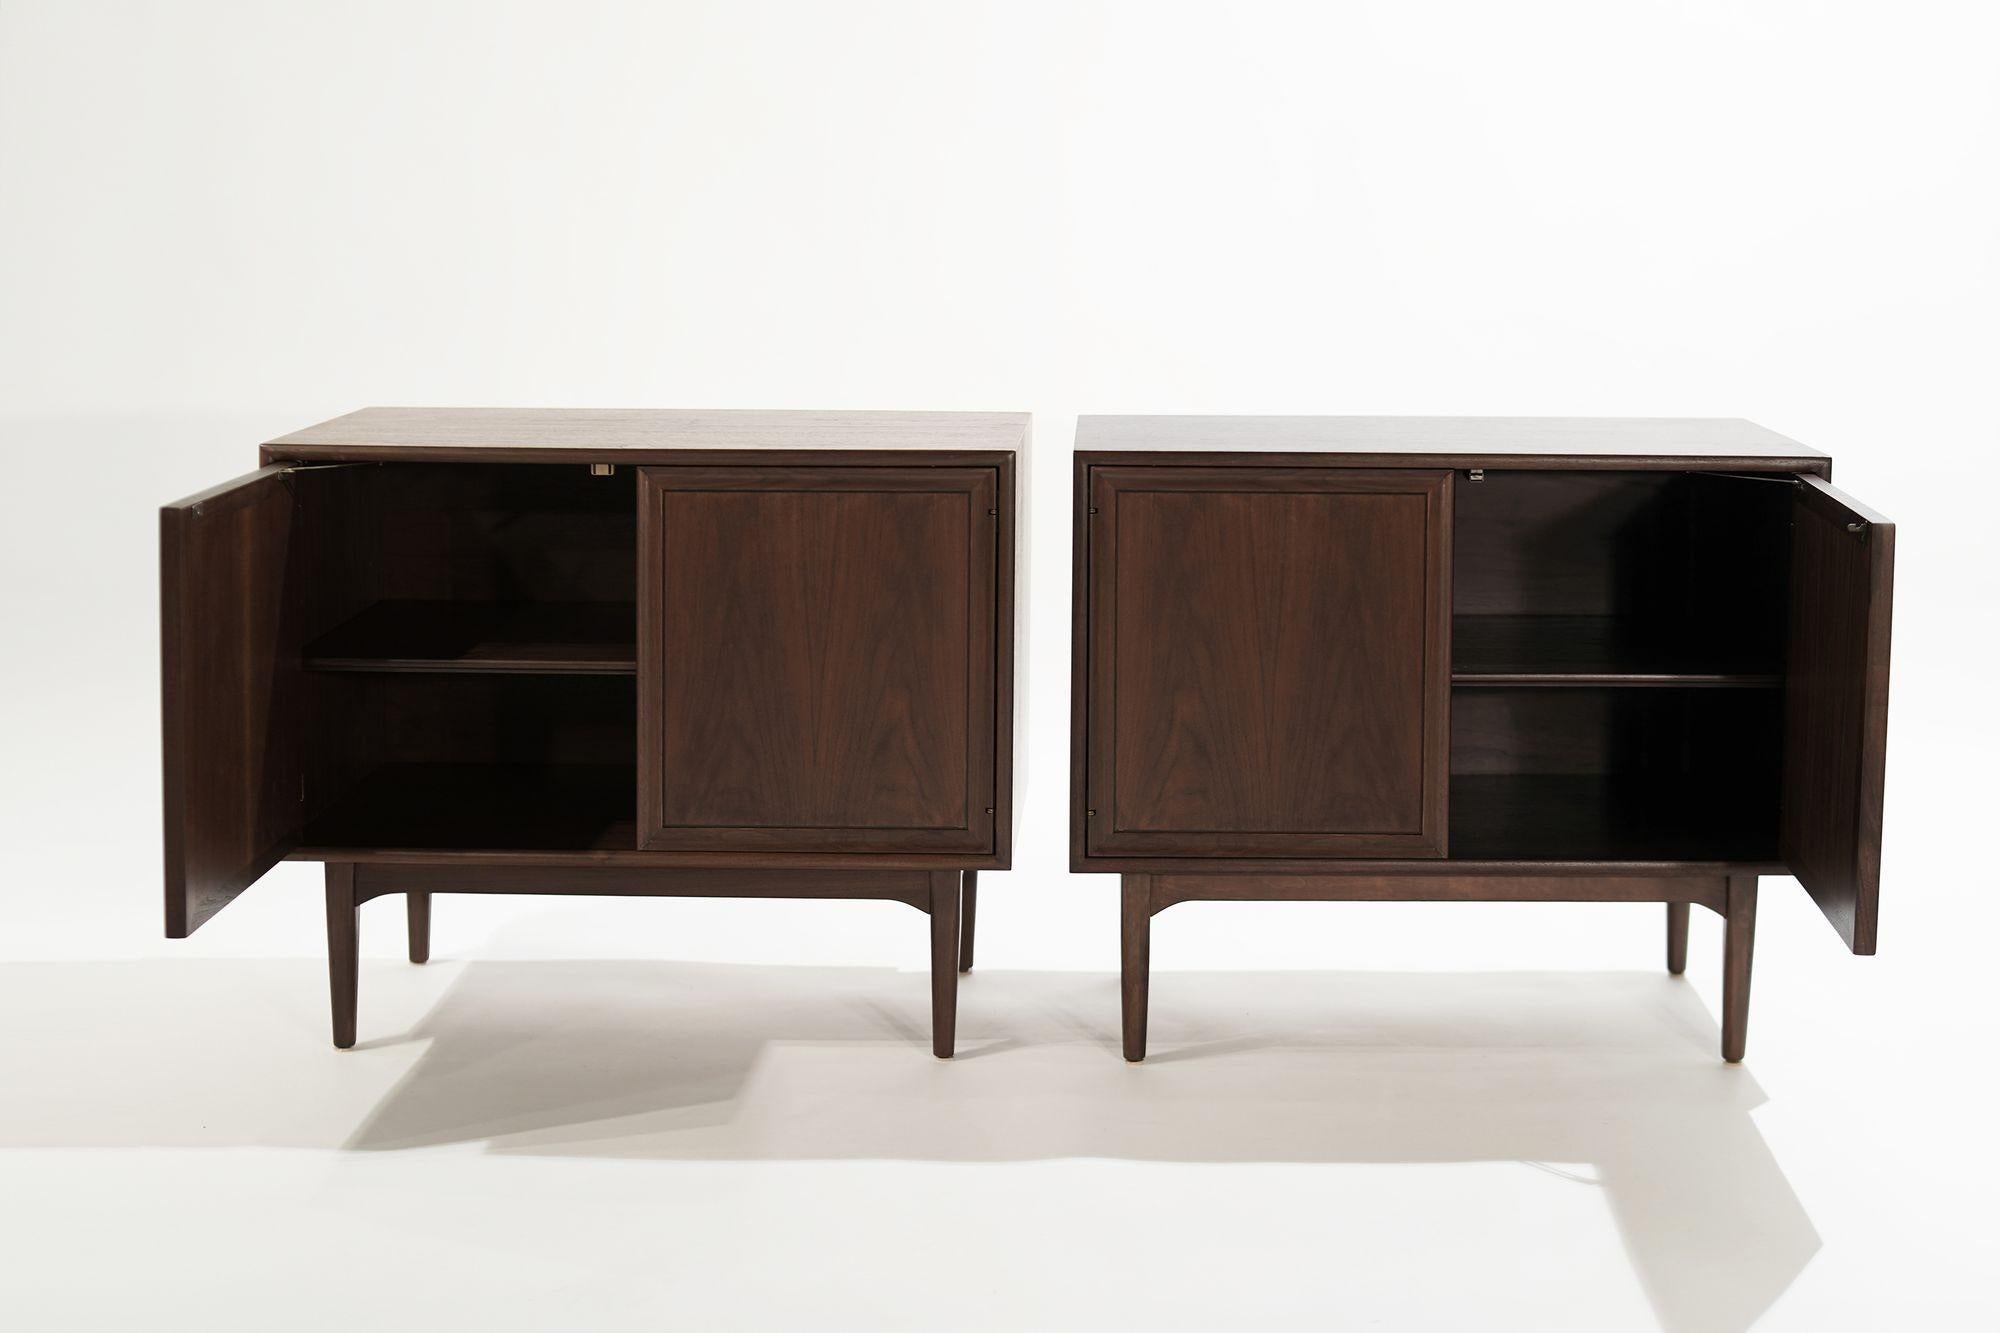 Elevate your interior with the timeless allure of these exquisite Walnut cabinets, masterfully crafted by the renowned Kipp Stewart for Drexel in the mid-20th century. Embodying the epitome of mid-century design, these cabinets boast doors equipped